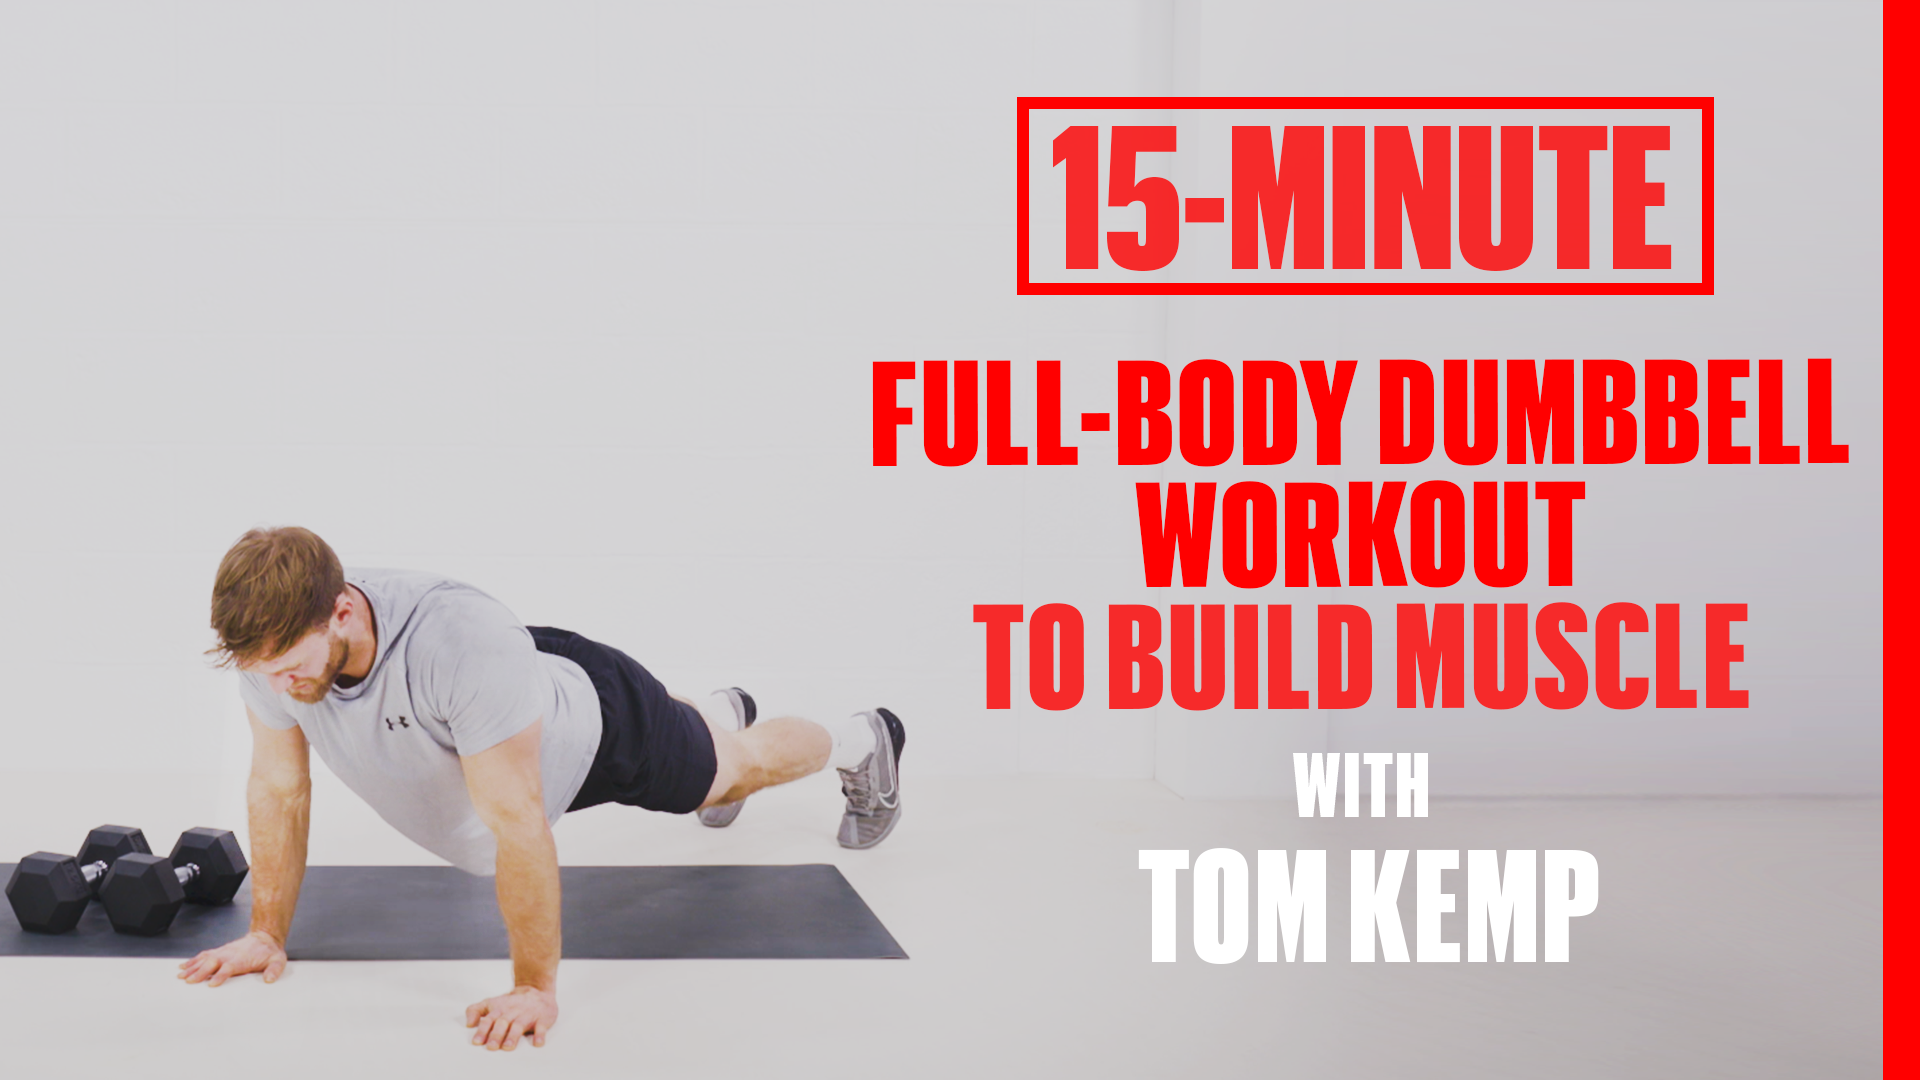 This One Dumbbell Workout Is a Full-Body Exercise Routine